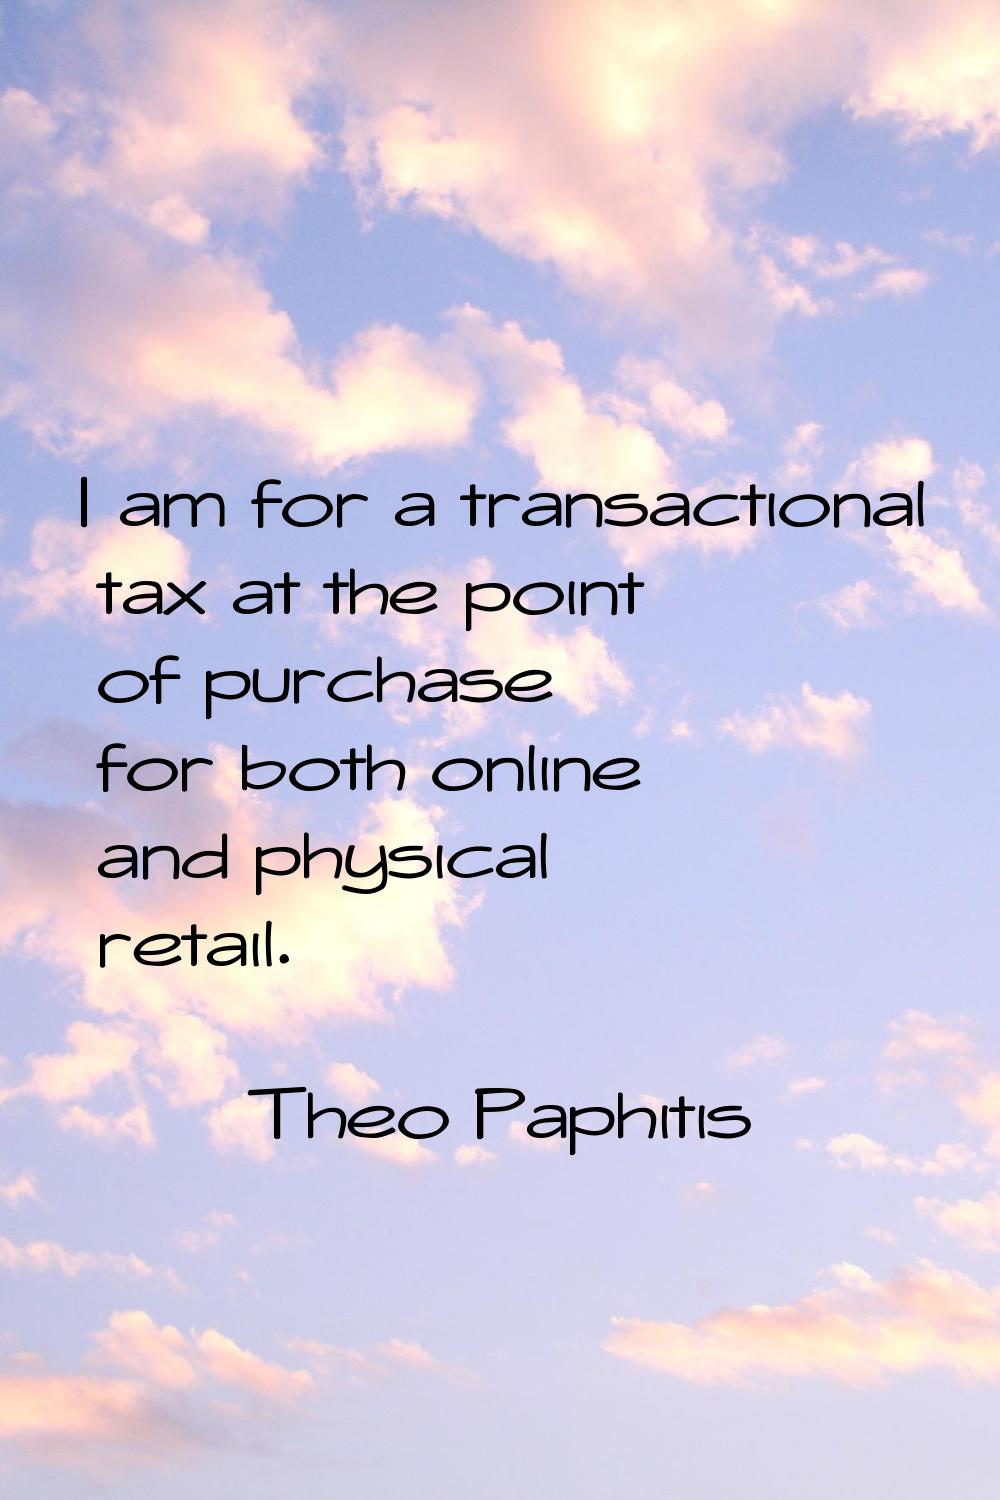 I am for a transactional tax at the point of purchase for both online and physical retail.